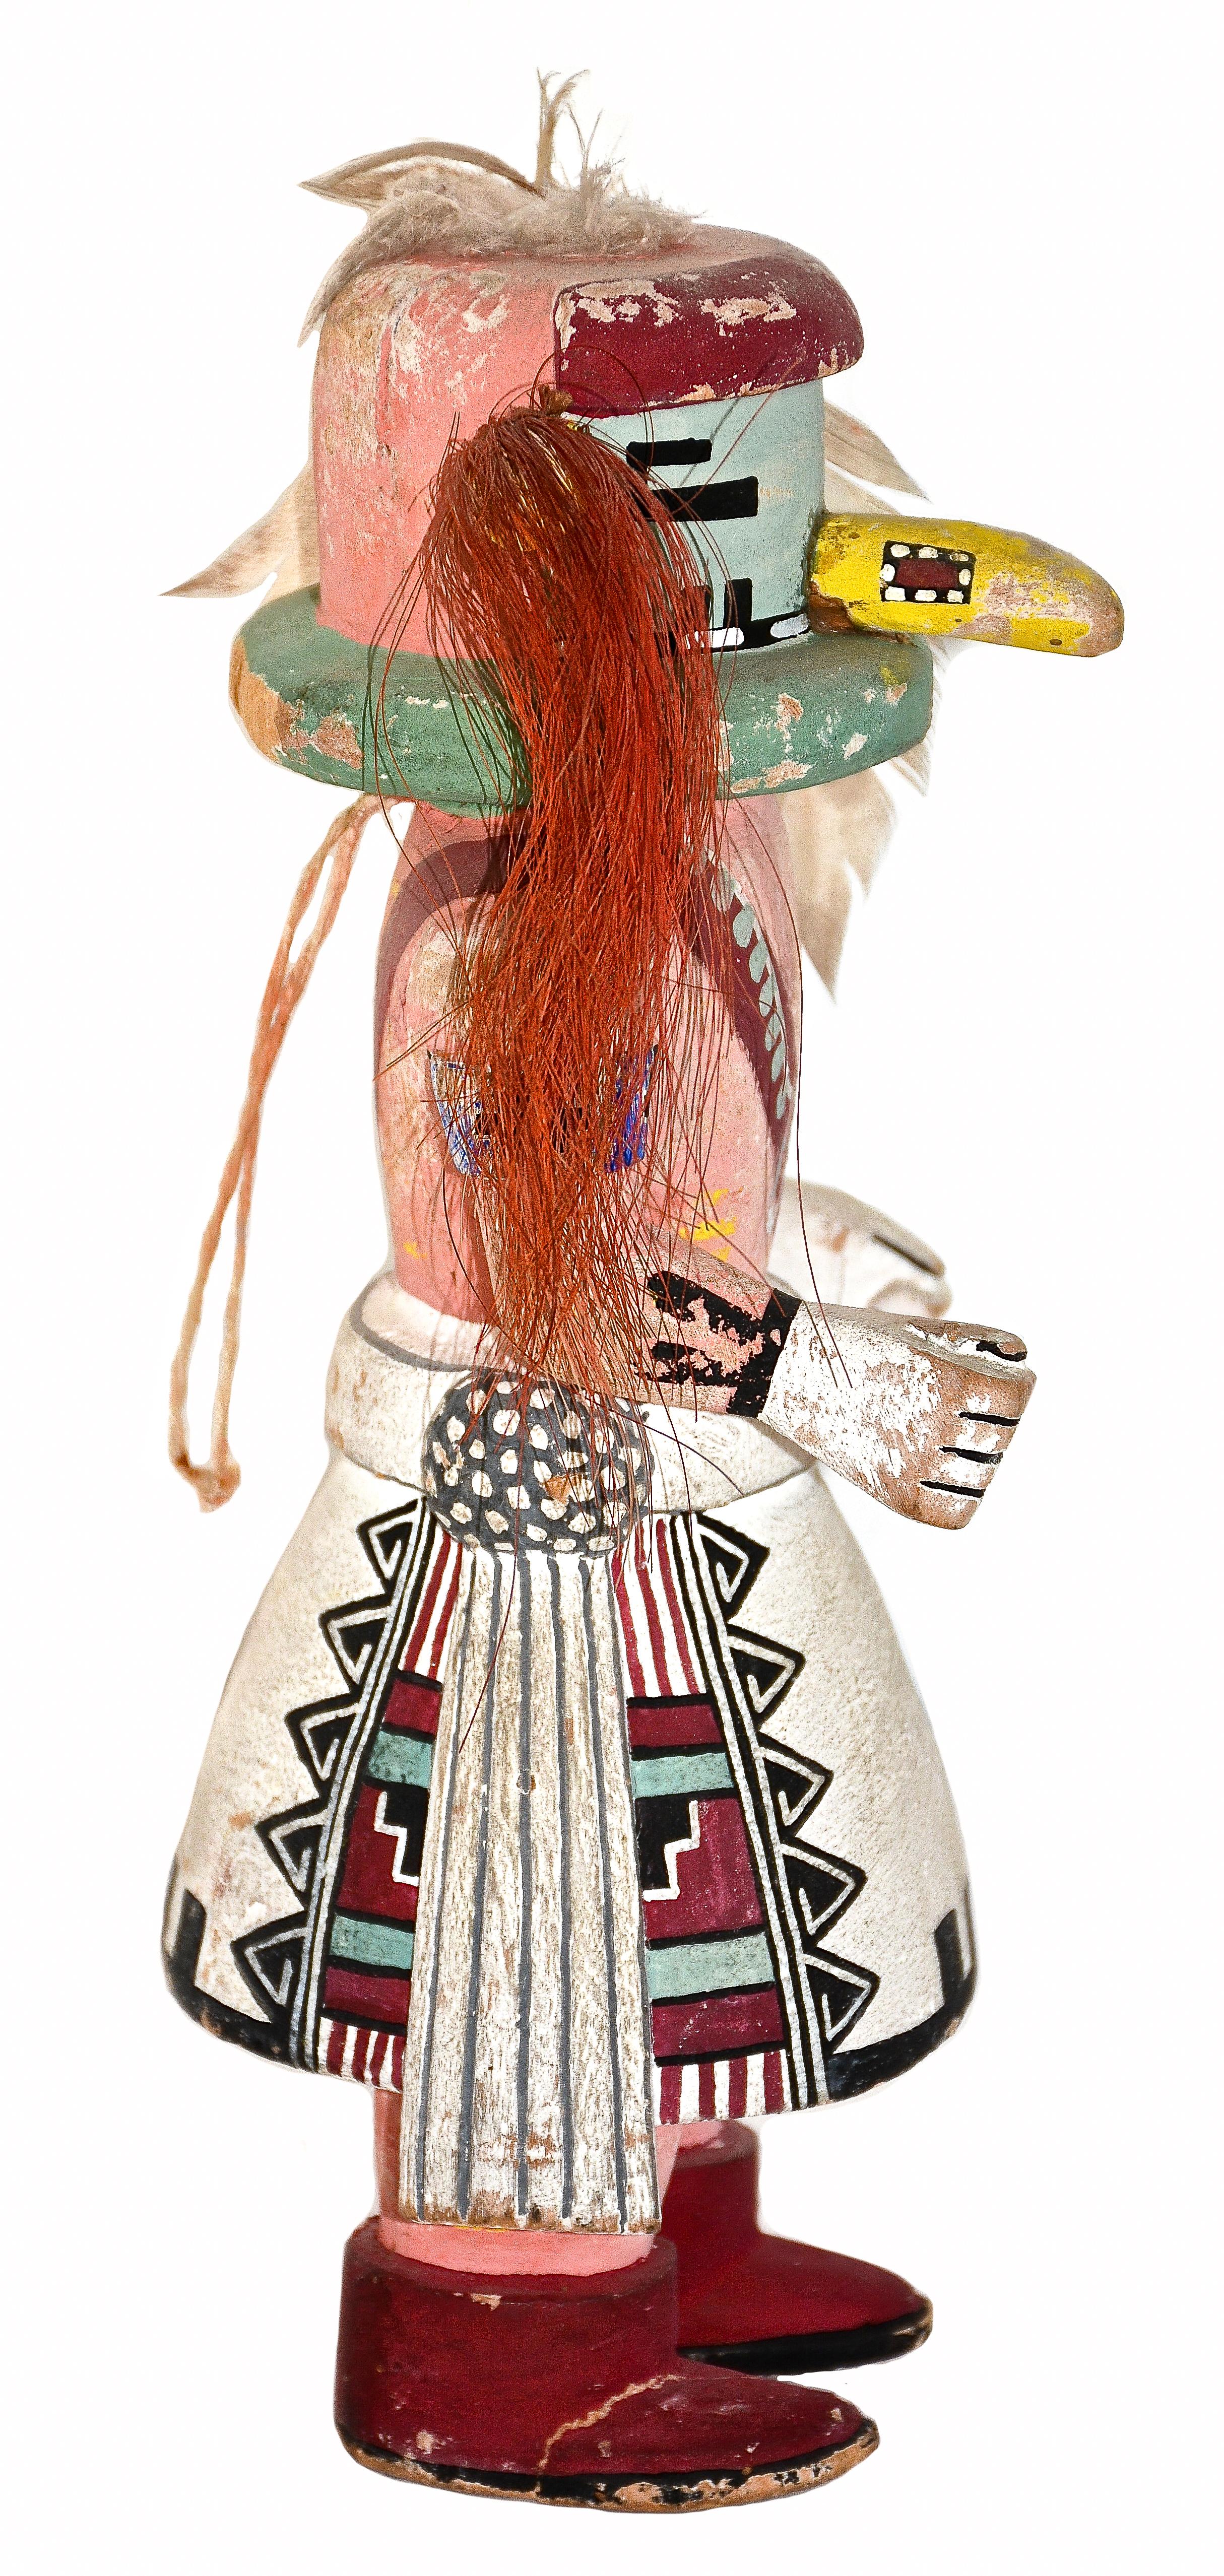 Tasaf Katsina
Hopi
1940s
10 inches H. x 4.50 inches W. x 3.75 inches D.
Cottonwood root, mineral pigments, dyed horsehair, feathers. 
Very good original condition overall.

An wonderful example of the Hopi Tasaf Katsina circa early to mid